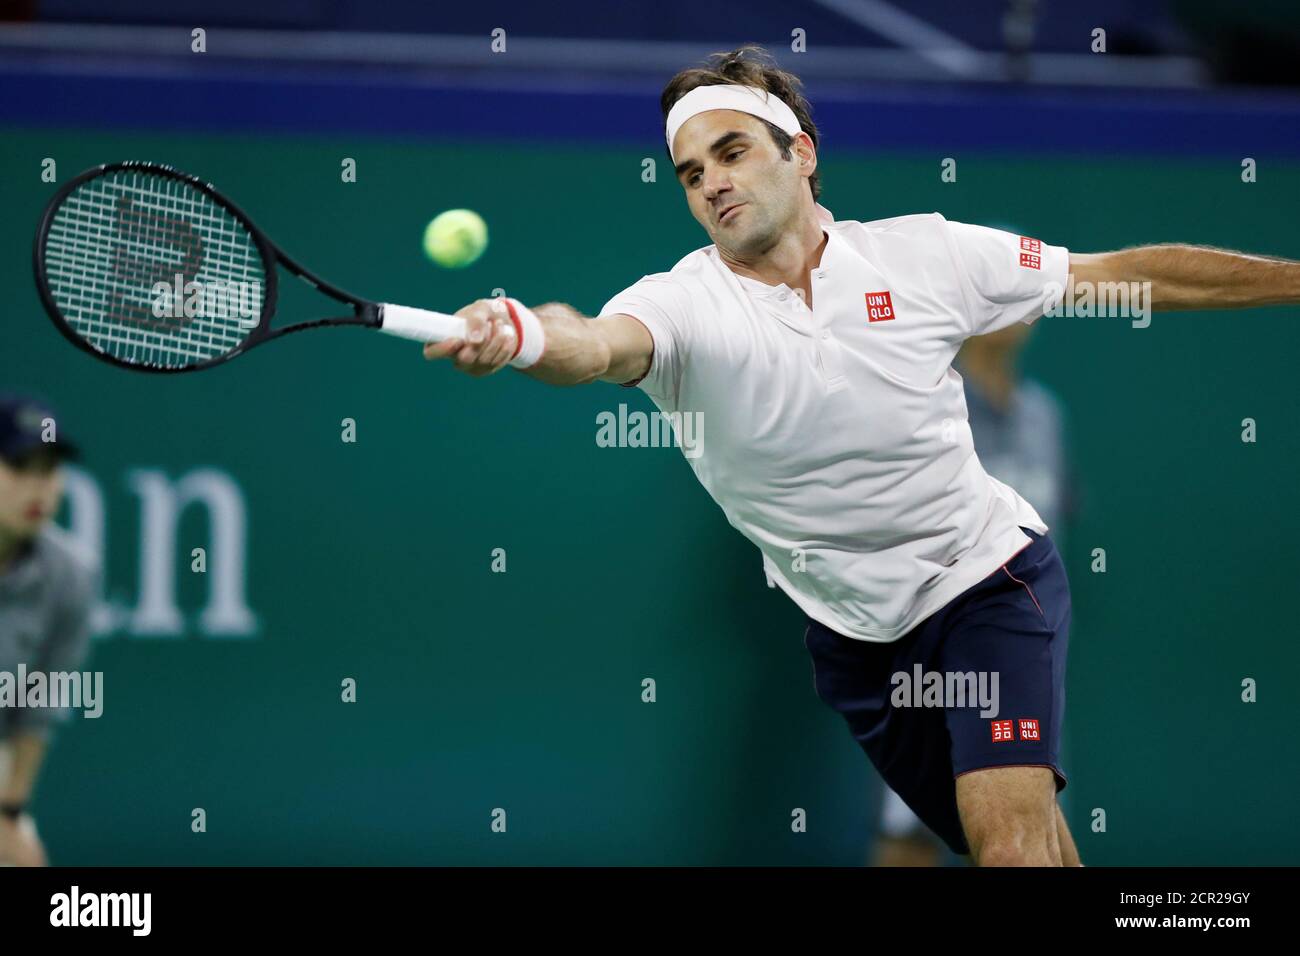 Tennis - Shanghai Masters - Shanghai, China - October 10, 2018 - Roger Federer of Switzerland in action against Daniil Medvedev of Russia. REUTERS/Aly Song Stock Photo